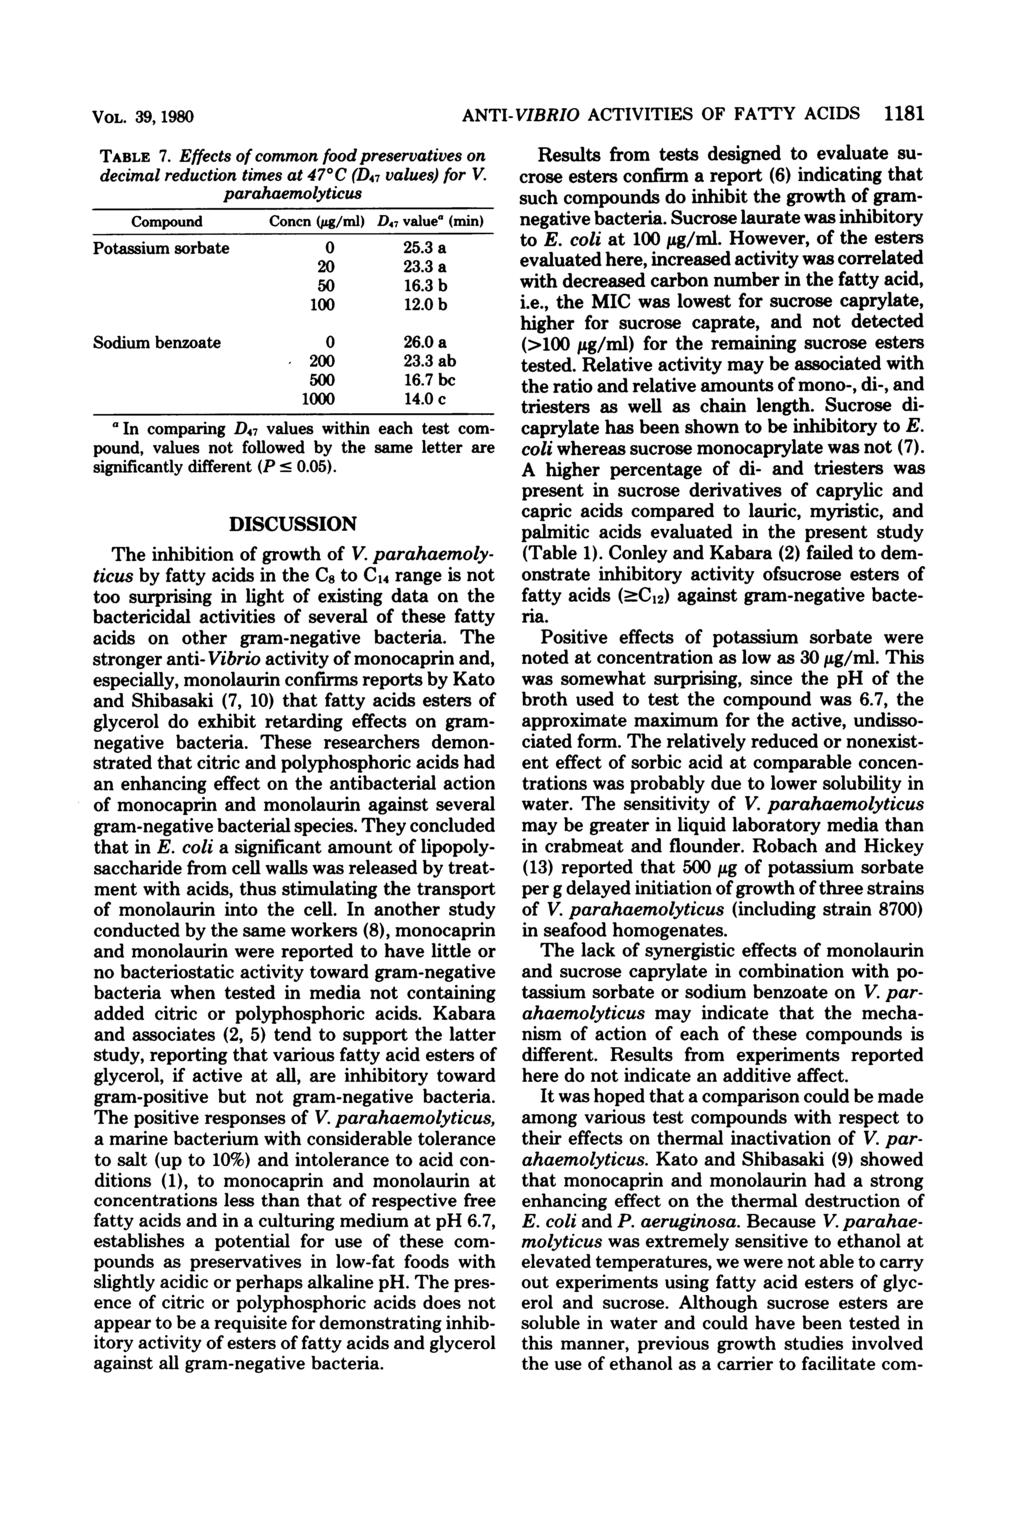 VOL. 39, 1980 TABLE 7. Effects of common foodpreservatives on decimal reduction times at 47 C (D47 values) for V. parahaemolyticus Concn (/tg/ml) D47 value' (min) Potassium sorbate 0 25.3 a 20 23.